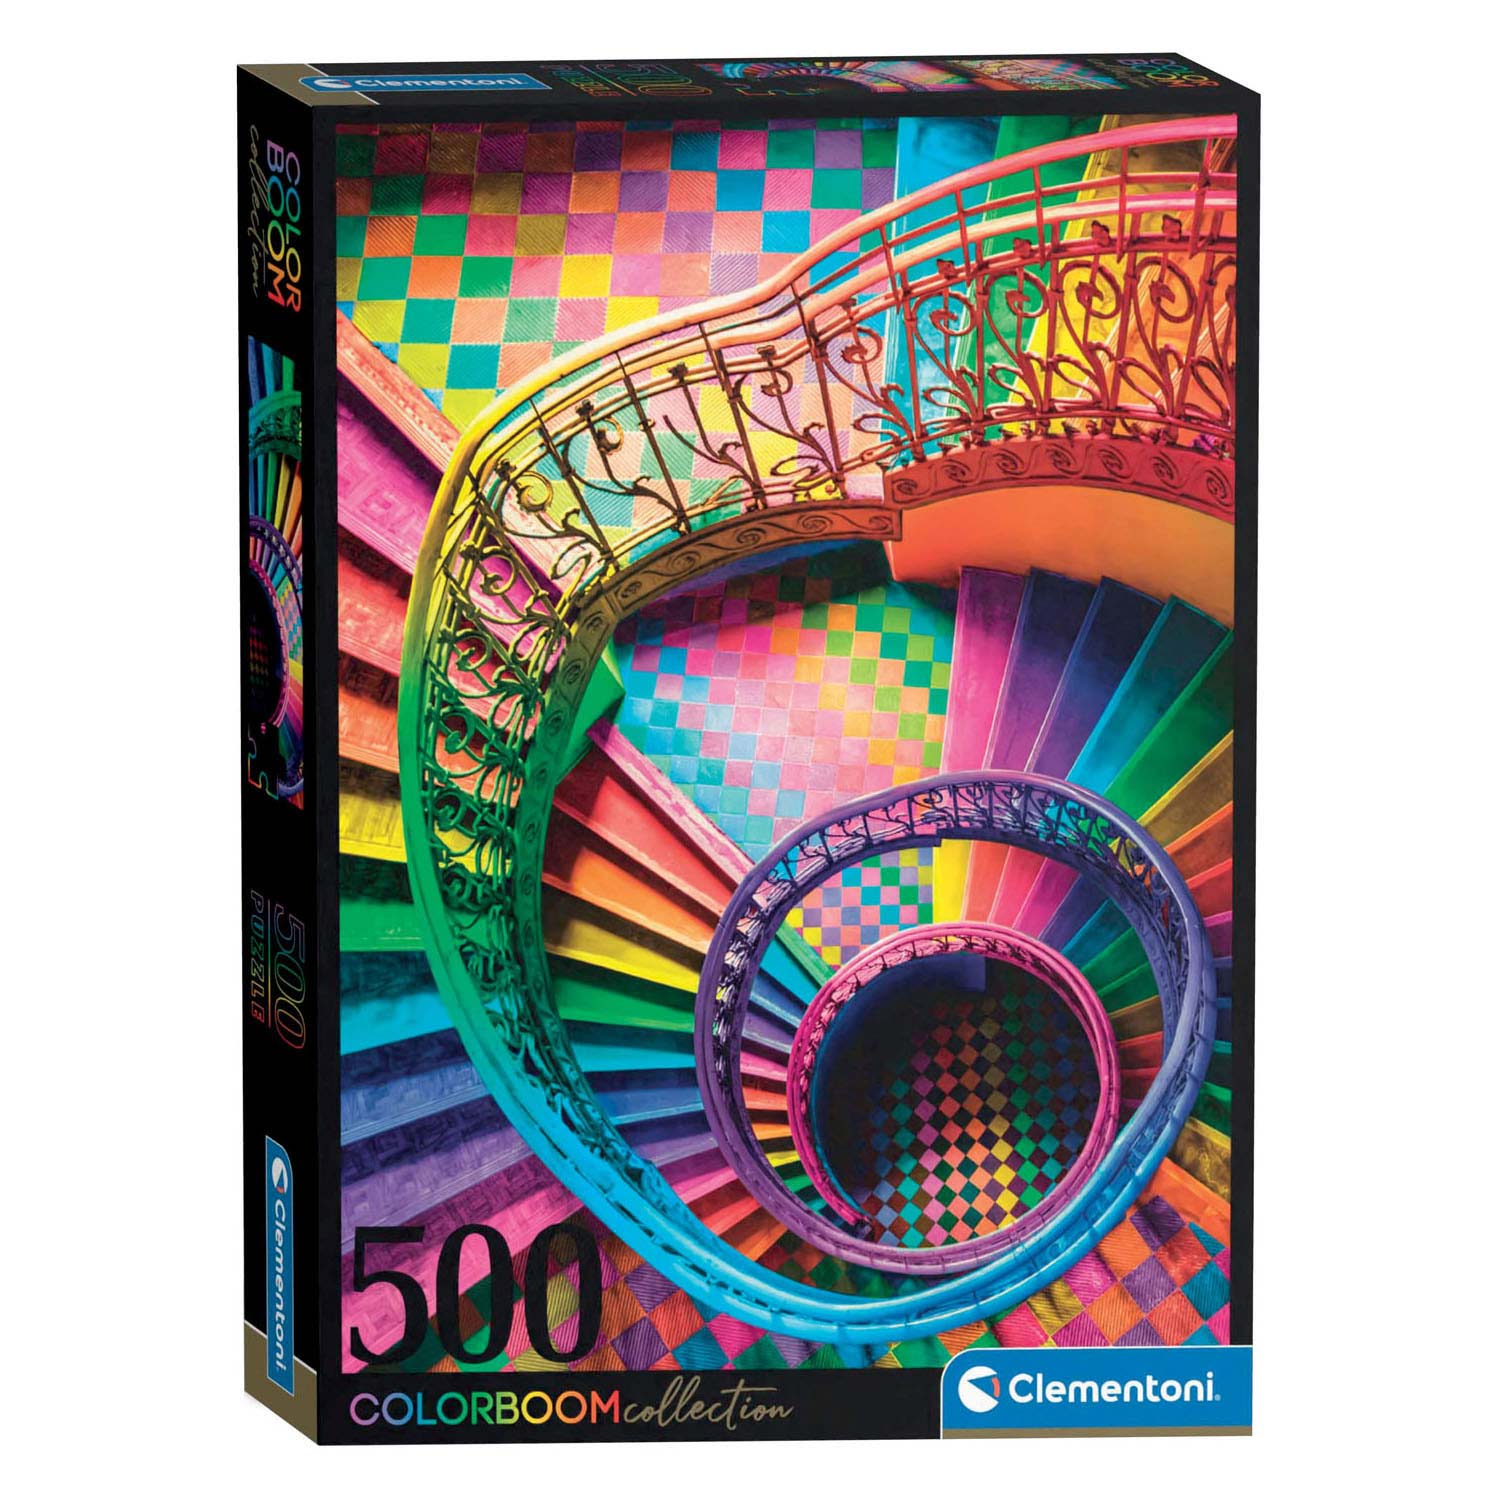 Clementoni Colorboom Jigsaw Puzzle Stairs, 500pcs.